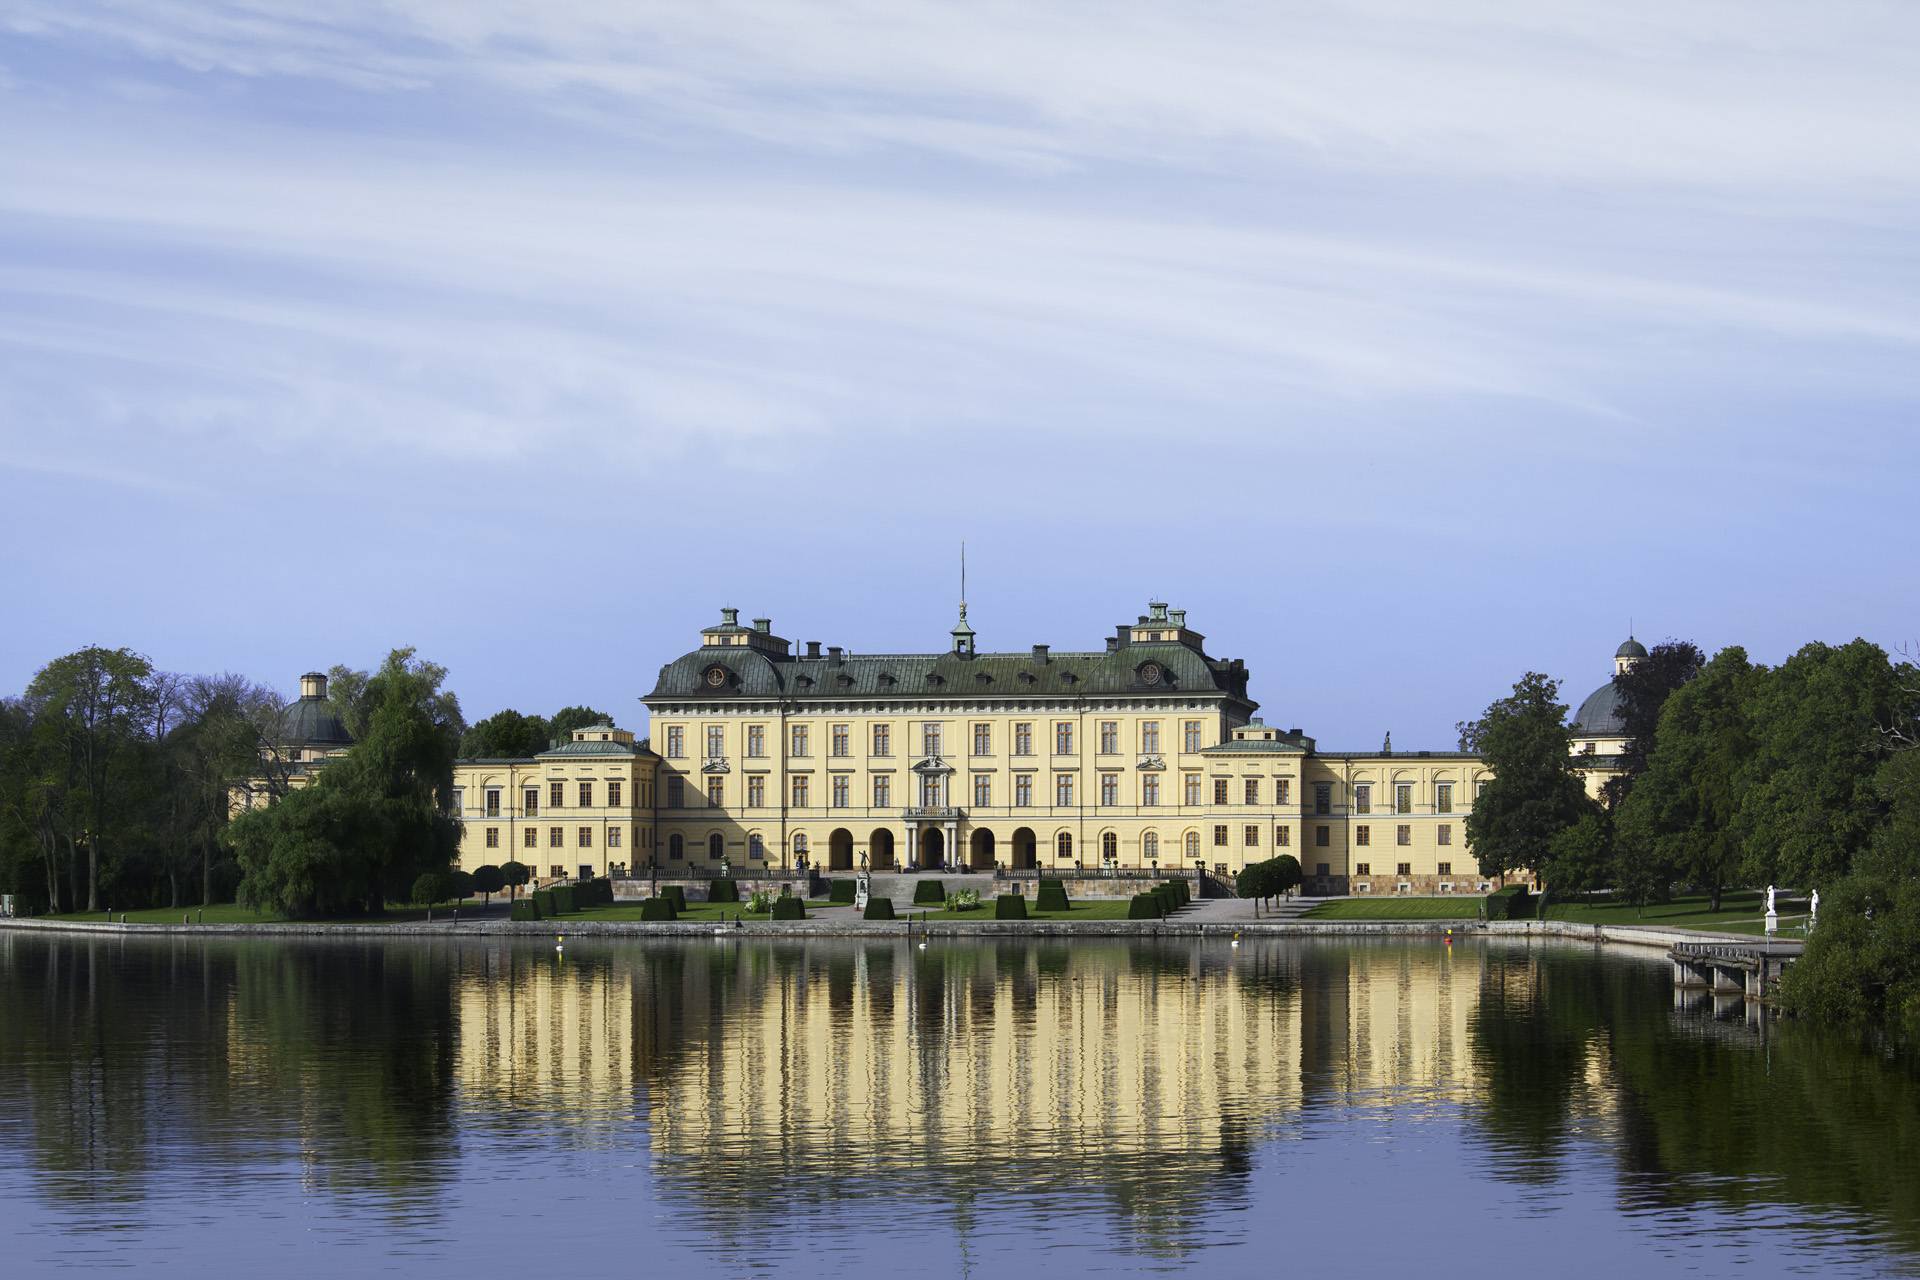 Drottningholm Palace, Stockholm, the private residence of the Swedish royal family